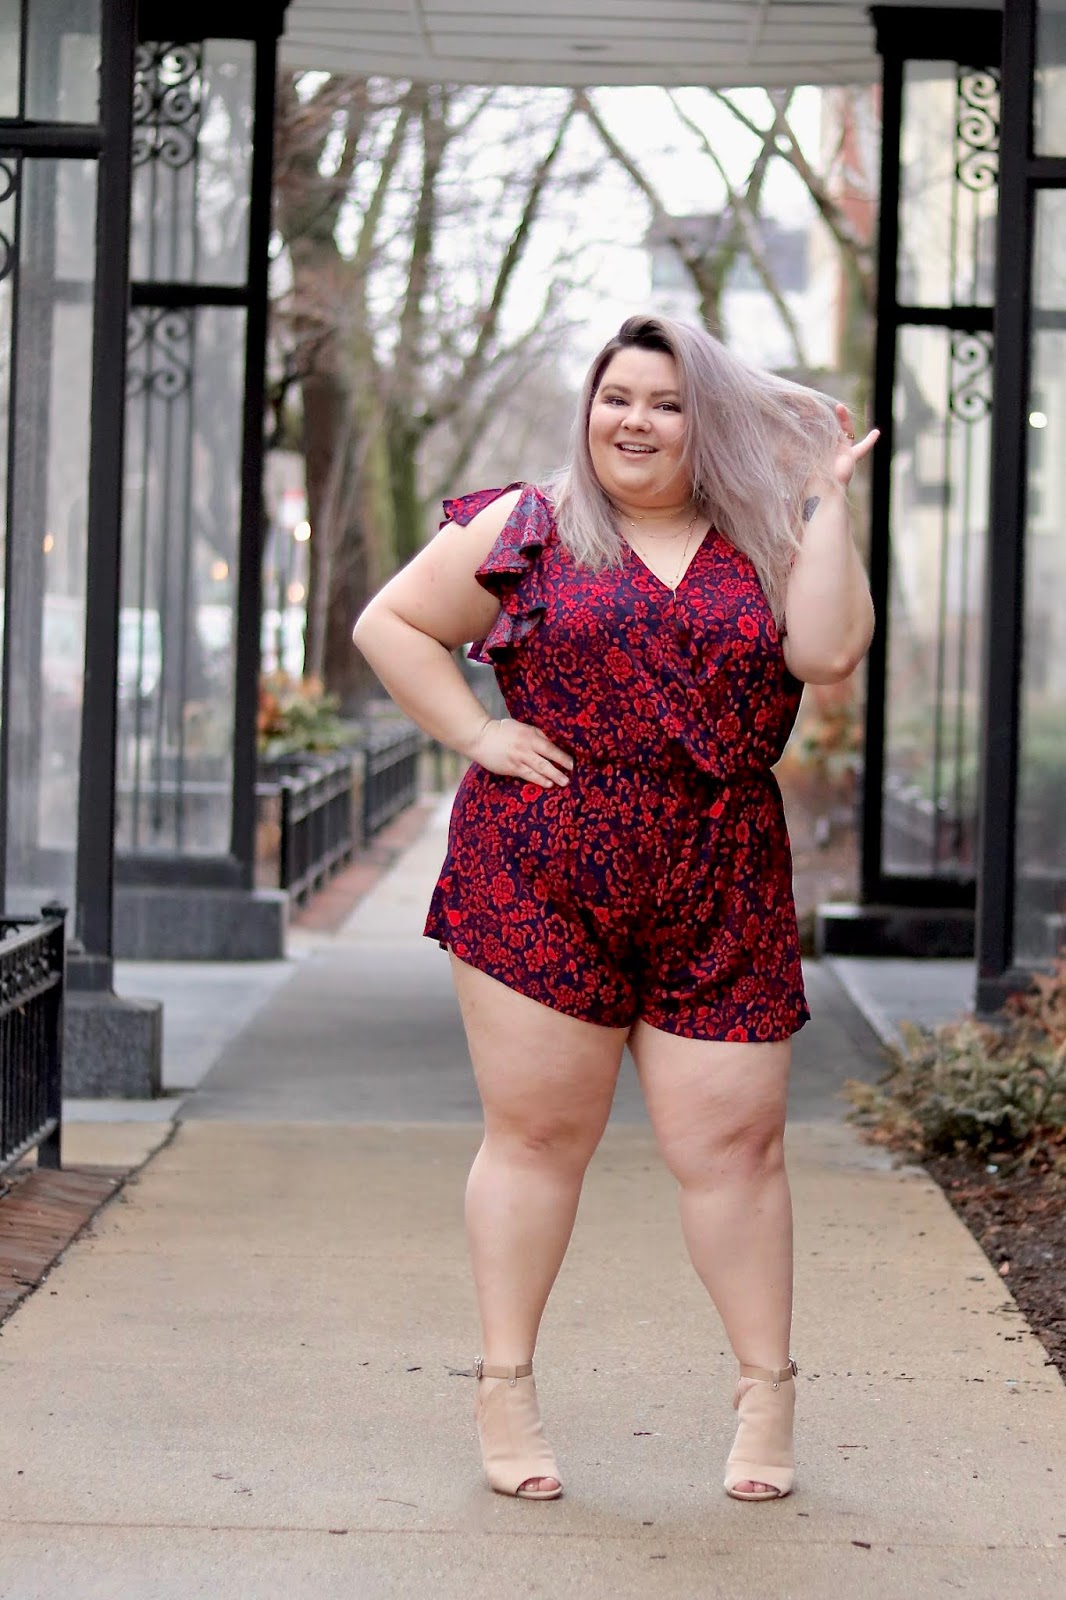 Plus size fashion blogger, model, and YouTuber Natalie Craig shares her favorite summer and spring styles from Gordmans, which just opened 38 new stores!